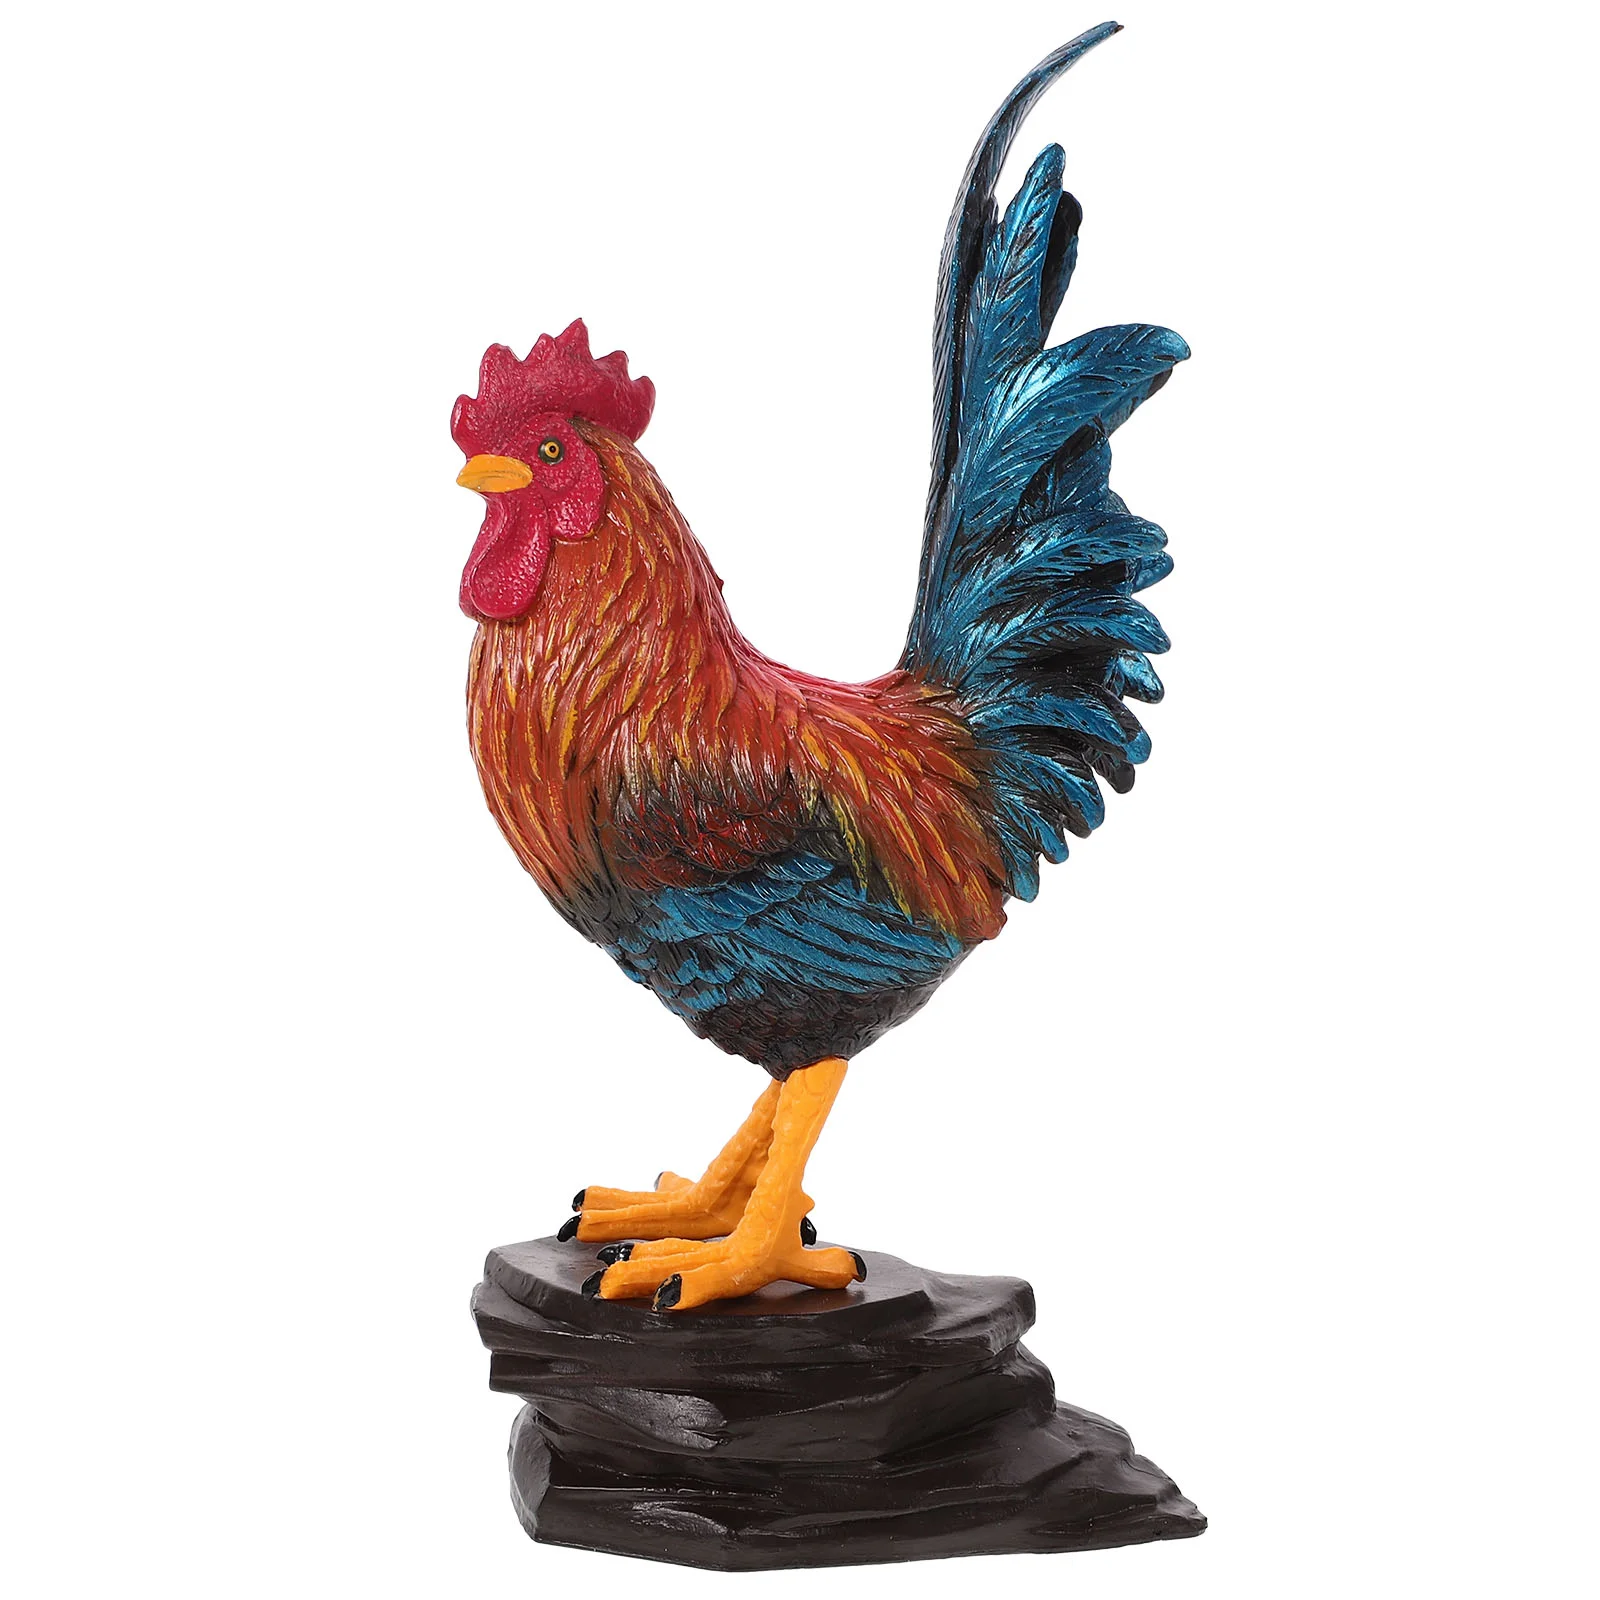 

1 set of Garden Rooster Figurine Realistic Rooster Statue Simulation Rooster Prop Tabletop Rooster